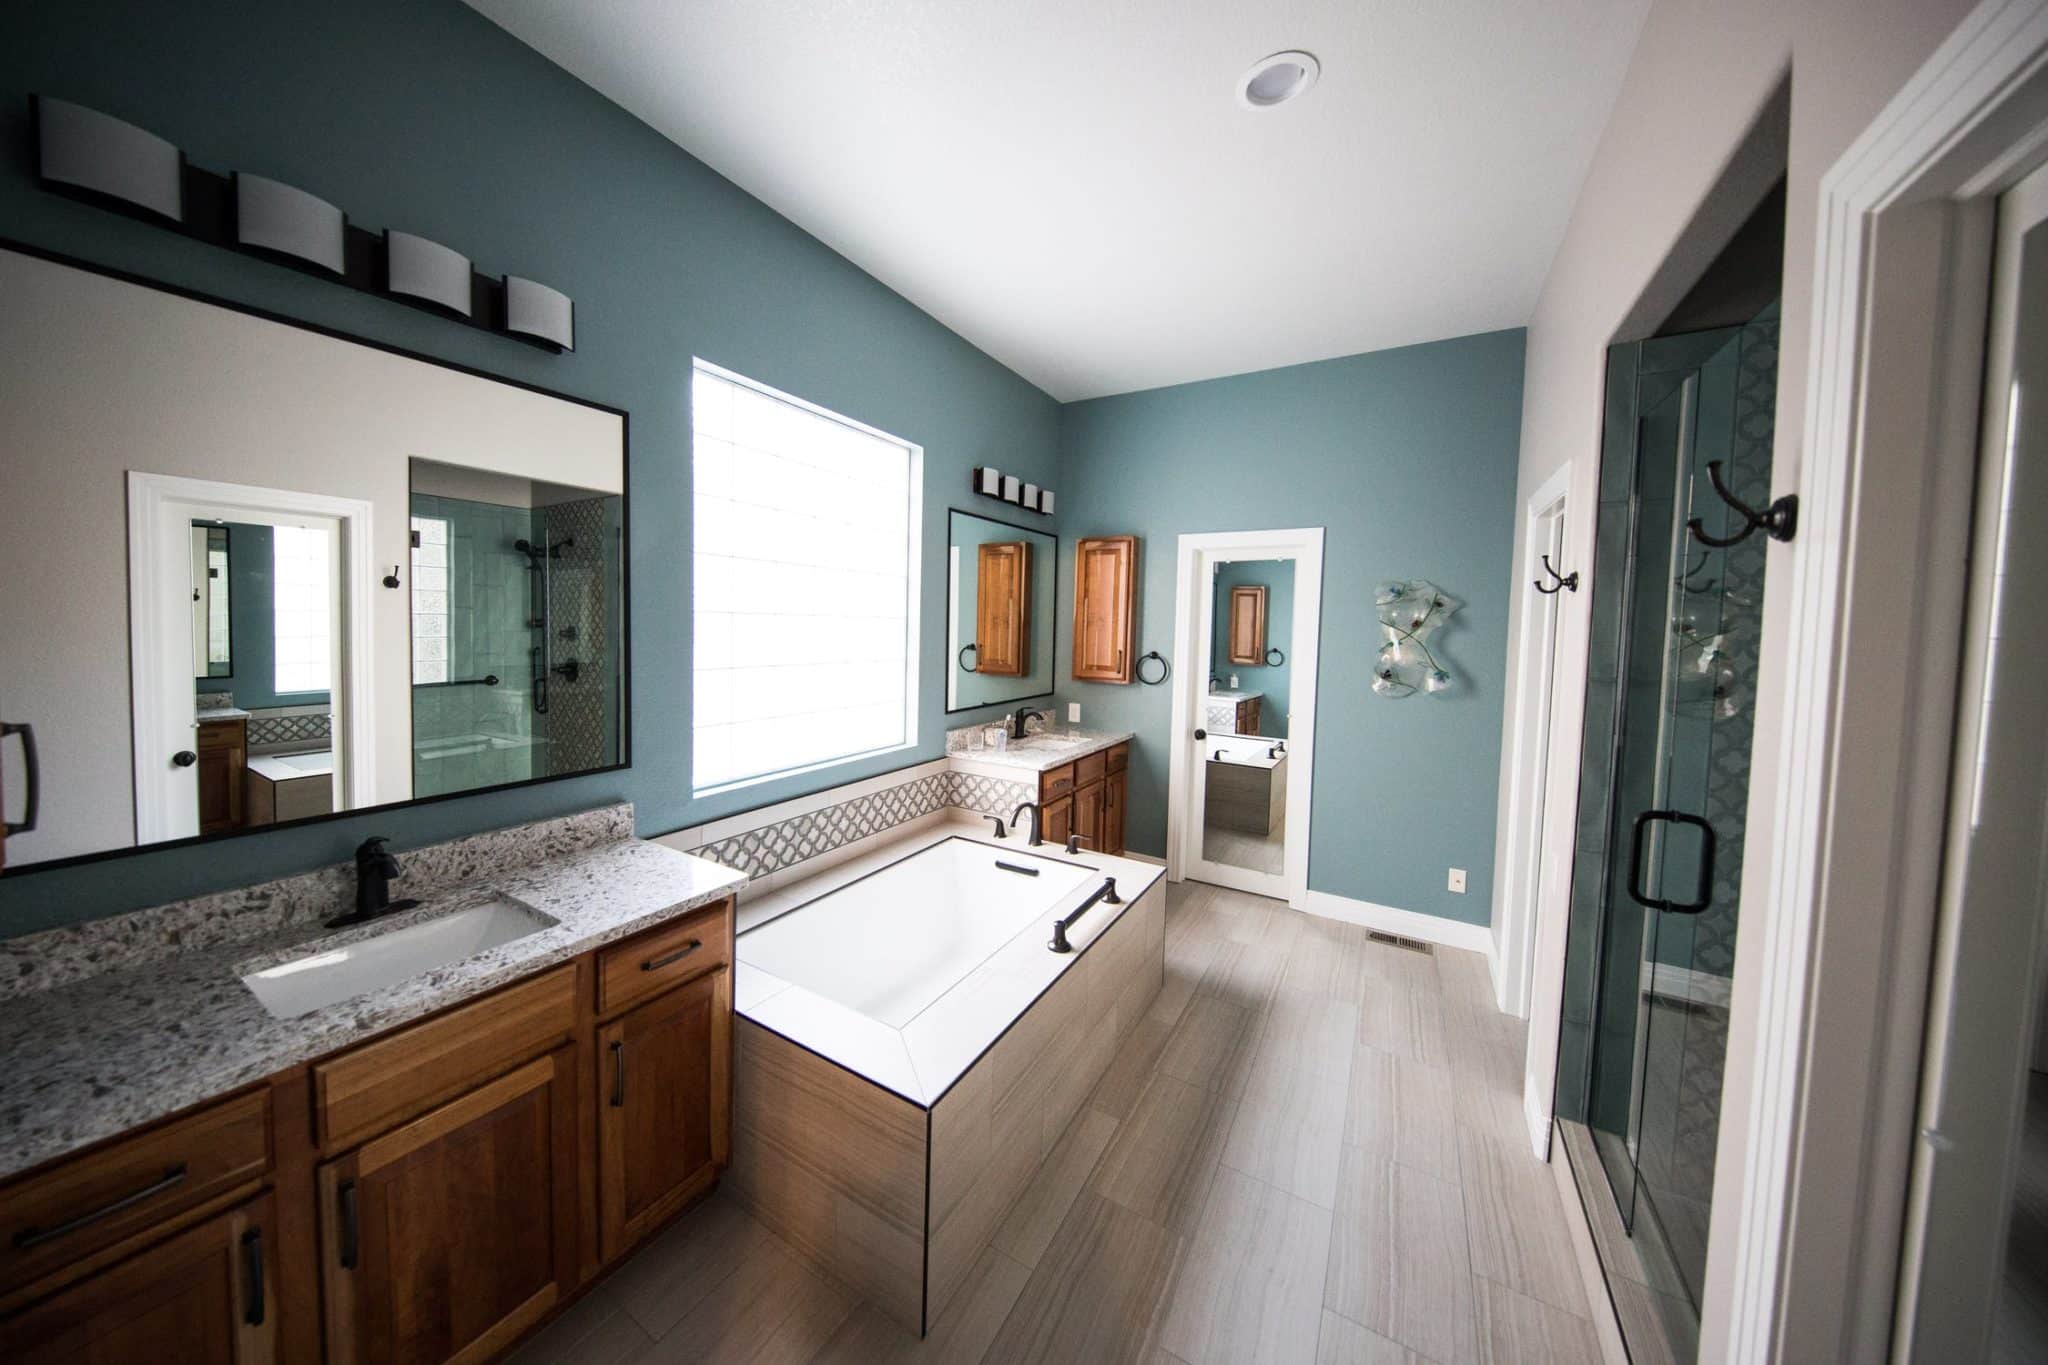 What Types of Finishes Work Well in a Dark Green Bathroom?